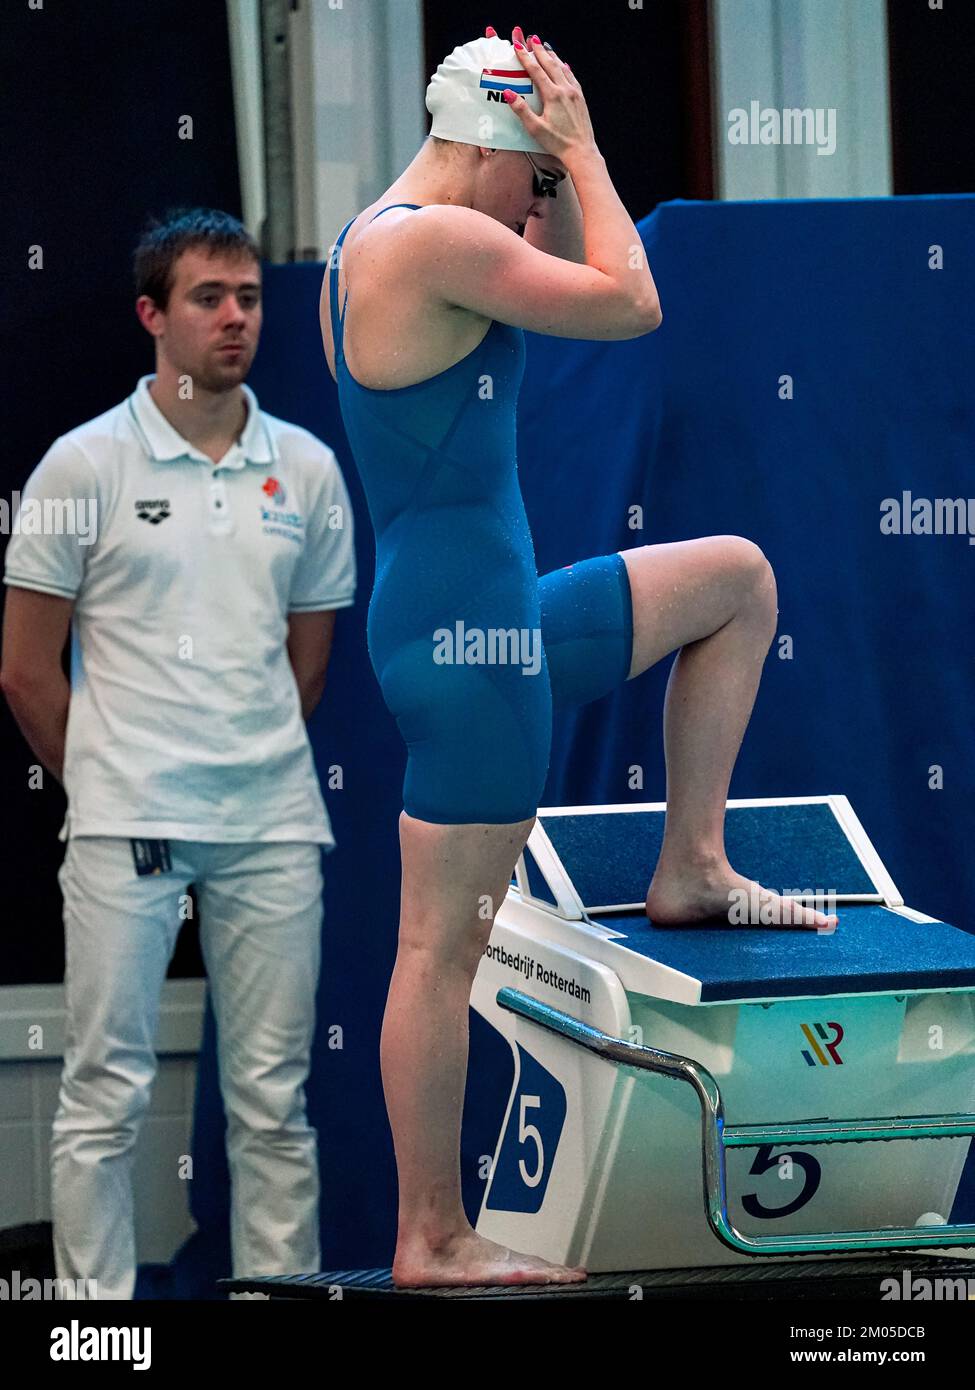 ROTTERDAM, NETHERLANDS - DECEMBER 4: Tessa Giele competing in the Women, 50m Freestyle, Finals during the RQM Rotterdam Qualification Meet - Day 4 at Zwemcentrum Rotterdam on December 4, 2022 in Rotterdam, Netherlands (Photo by Jeroen Meuwsen/Orange Pictures) House of Sports Stock Photo